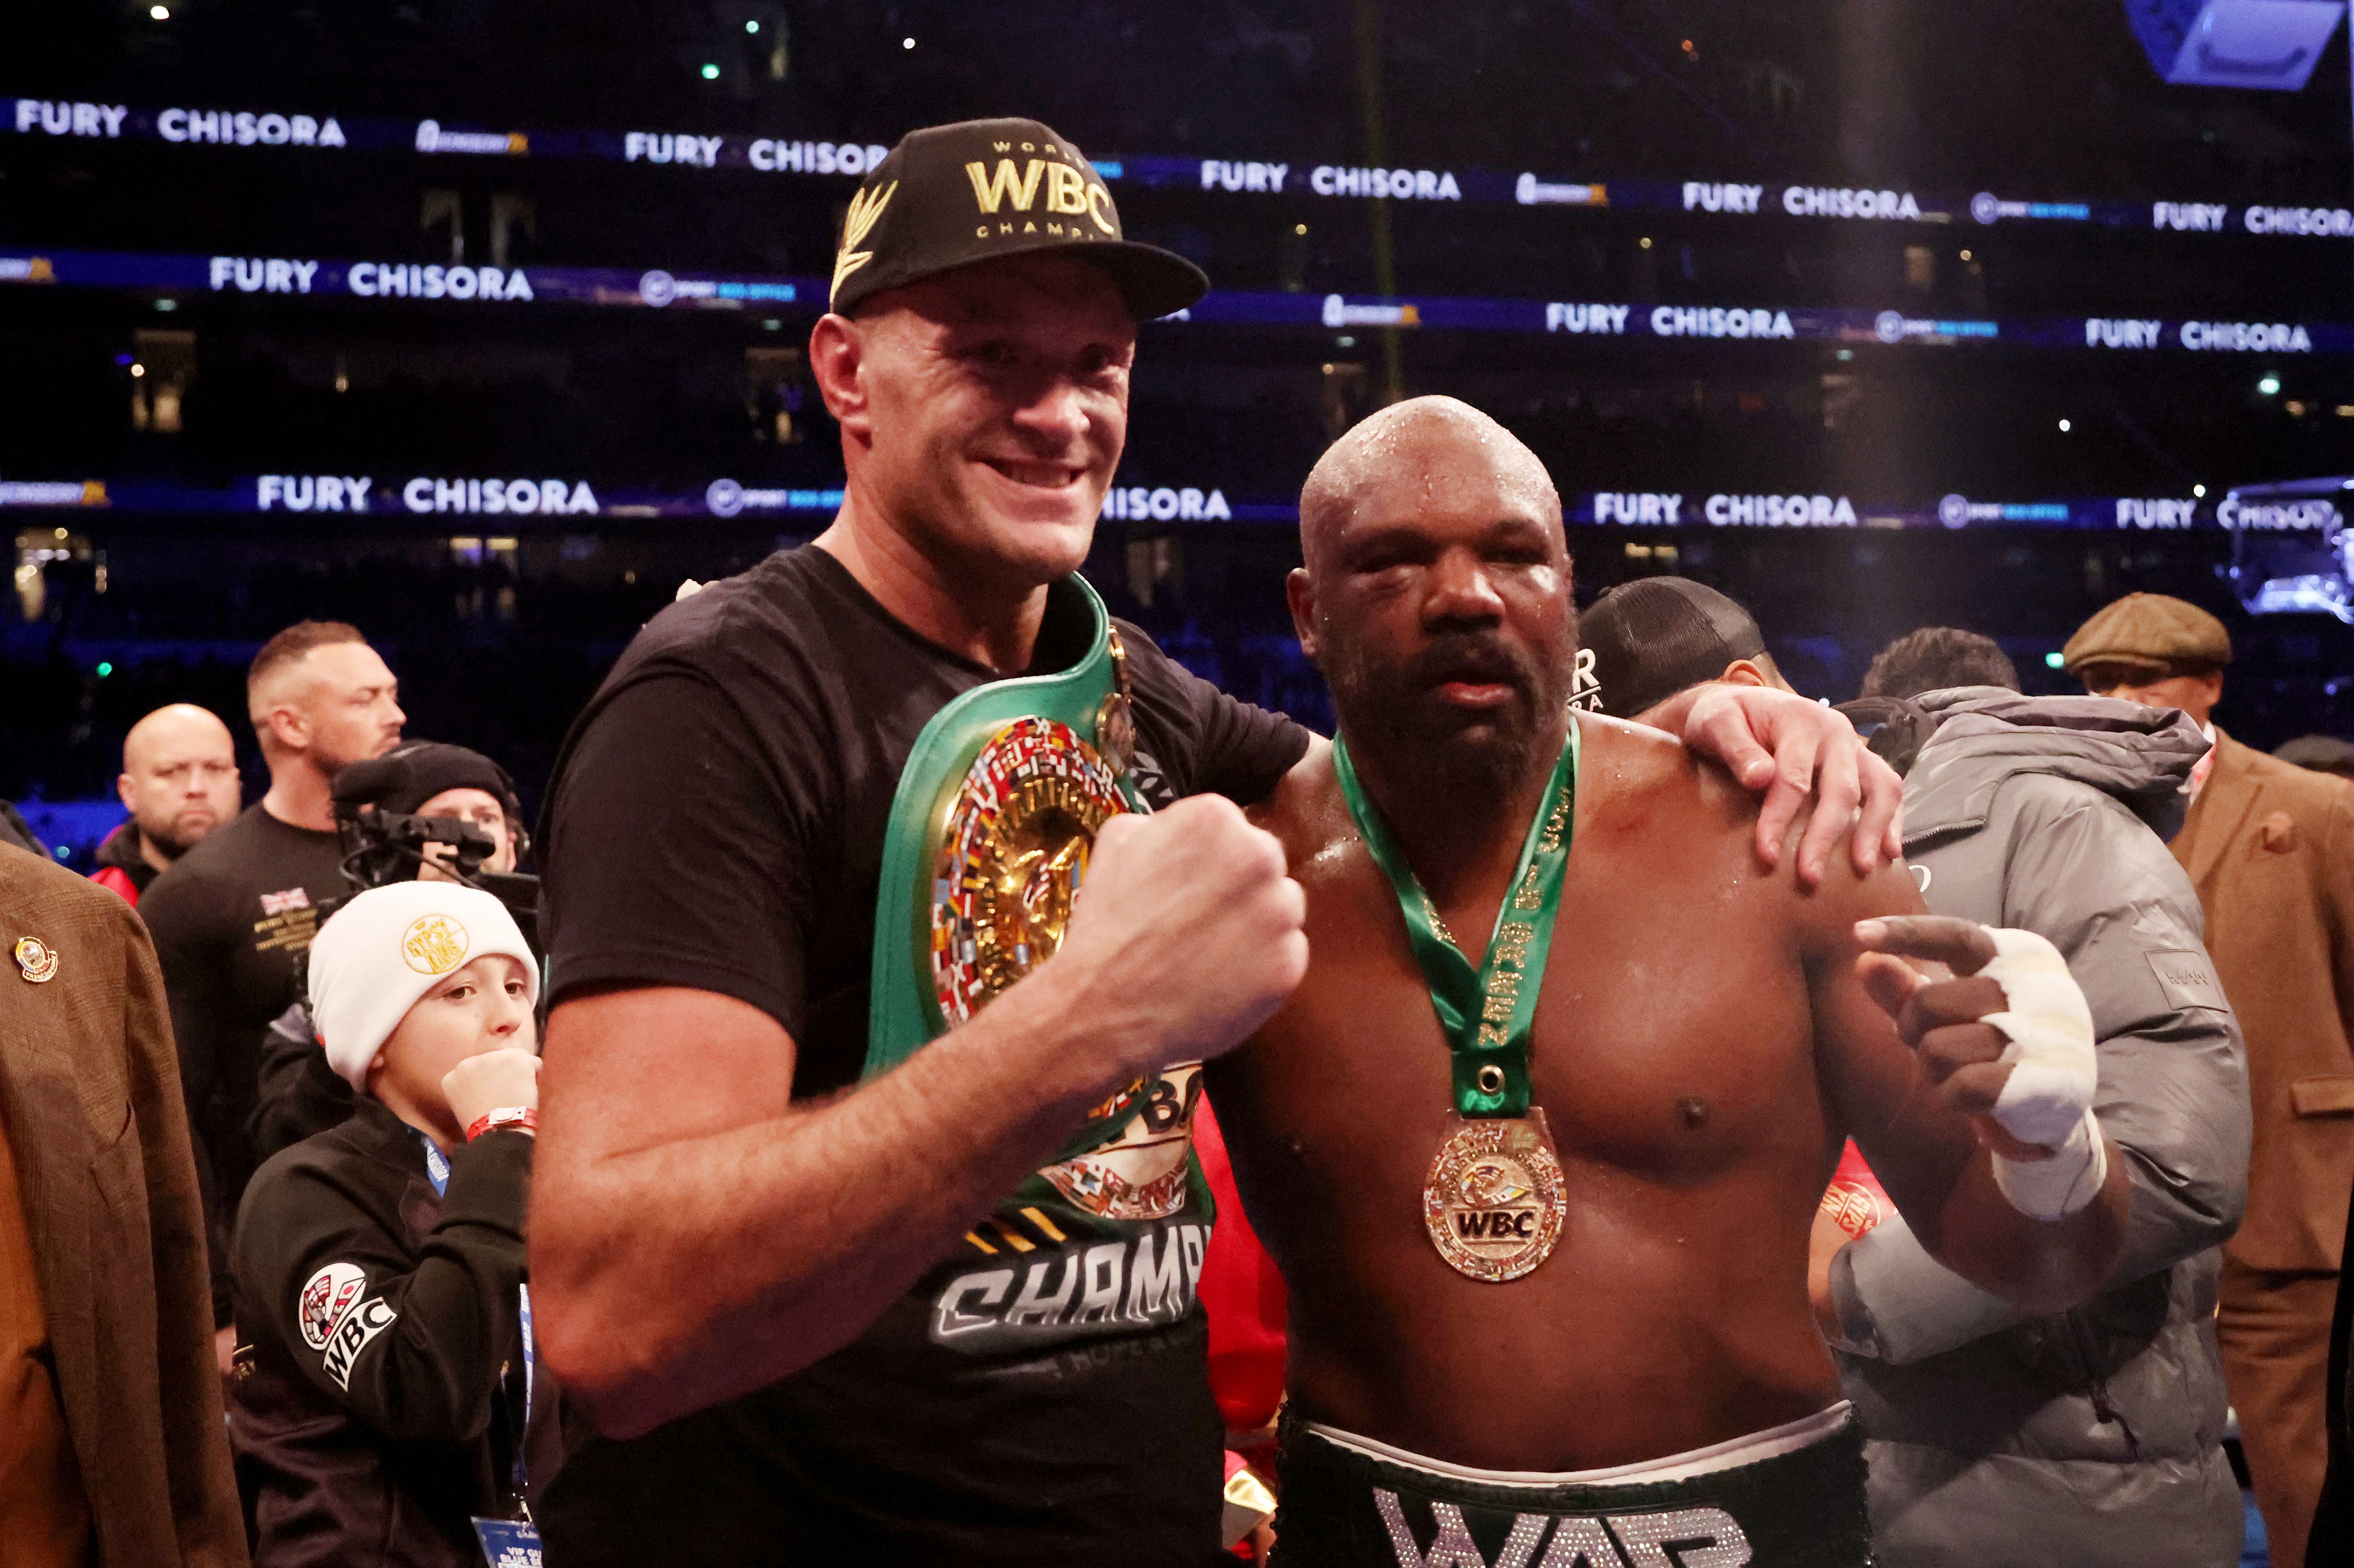 Tyson Fury and Derek Chisora pose for photos after their fight